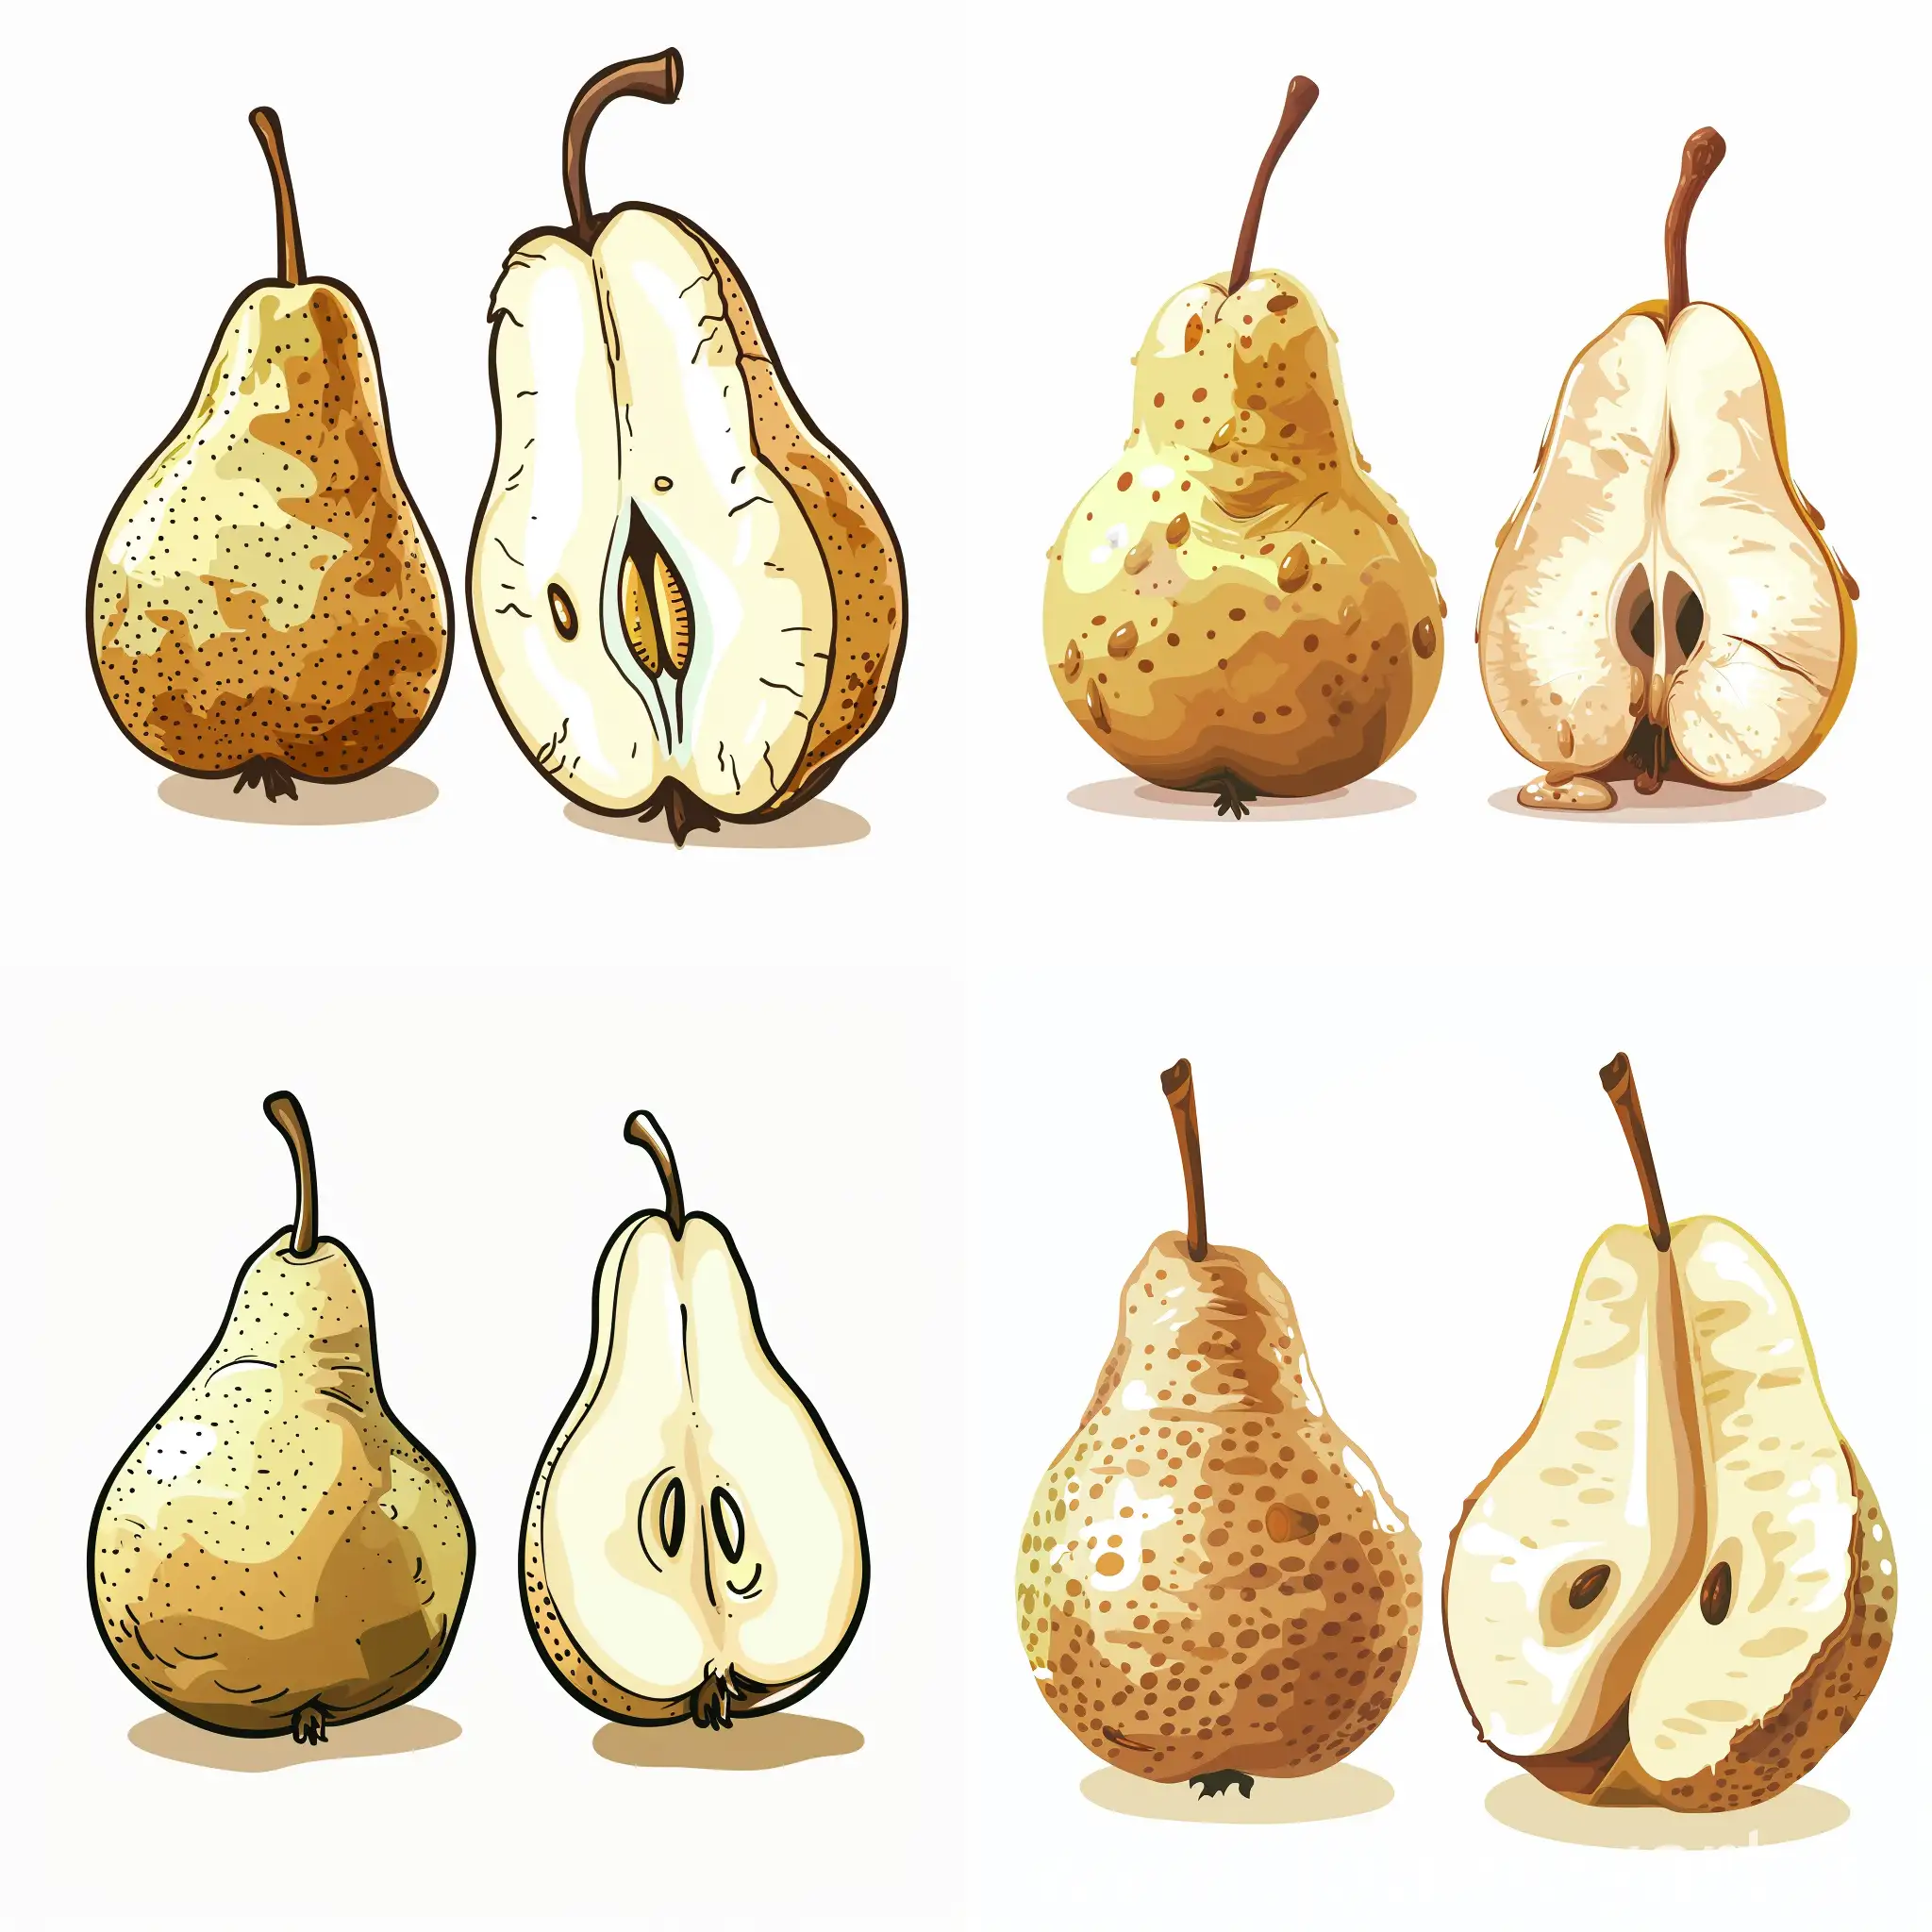 cartoon style, vector style, Two cartoon pears on a white background. The pear on the left is whole. The pear on the right is eaten down to the core.